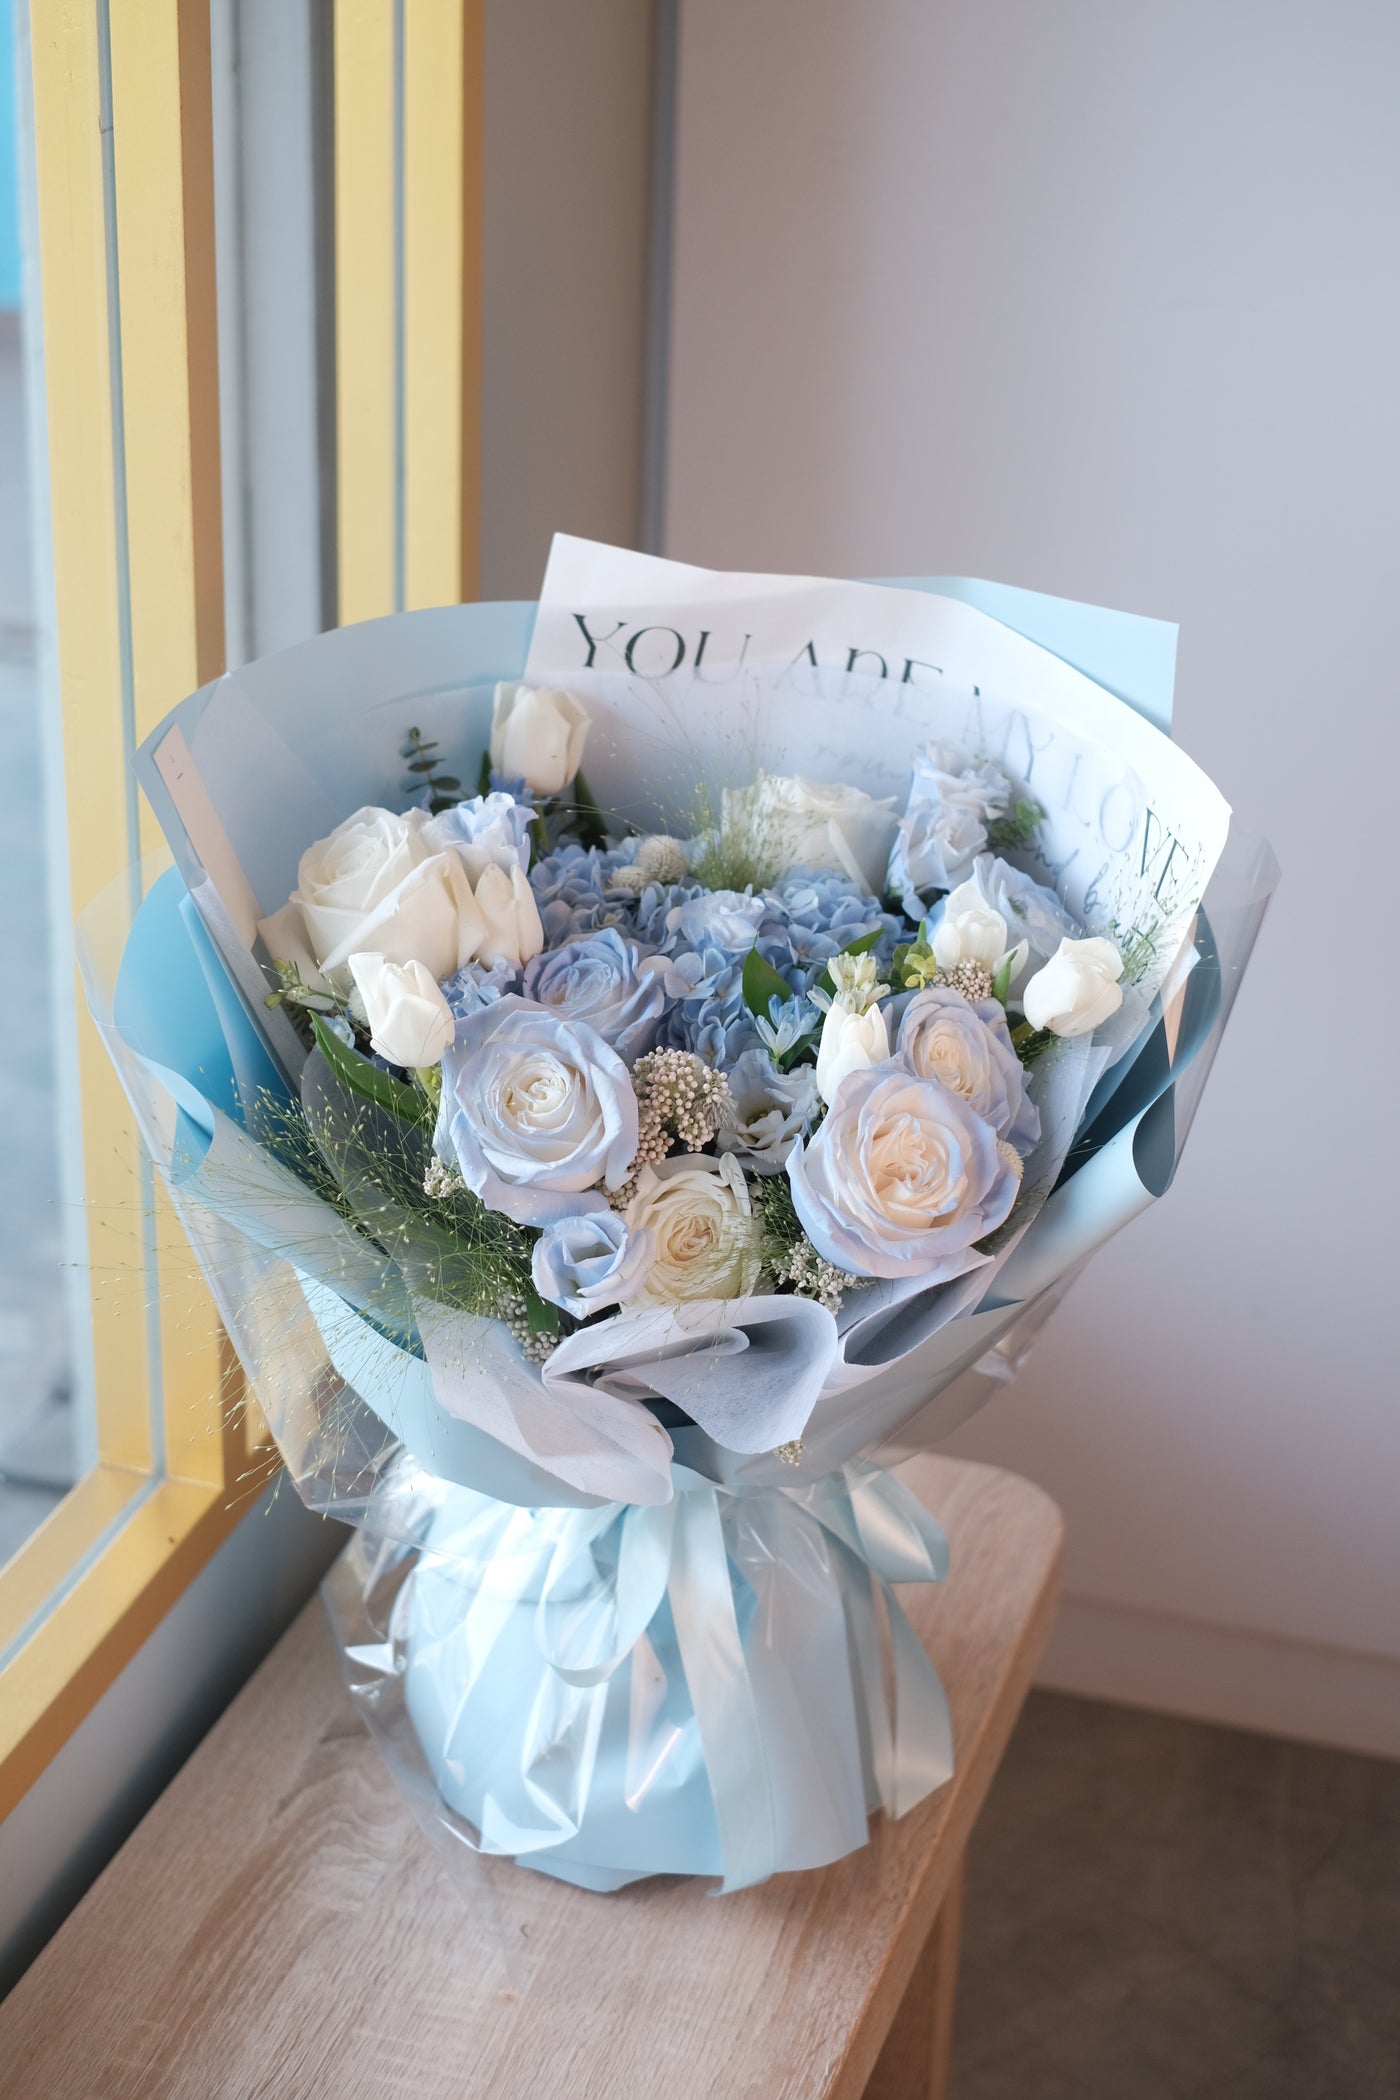 pastel coloured flowers complemented with a sea of blue perfection featuring hydrangeas, roses, eustomas, tulips, and assorted fillers.